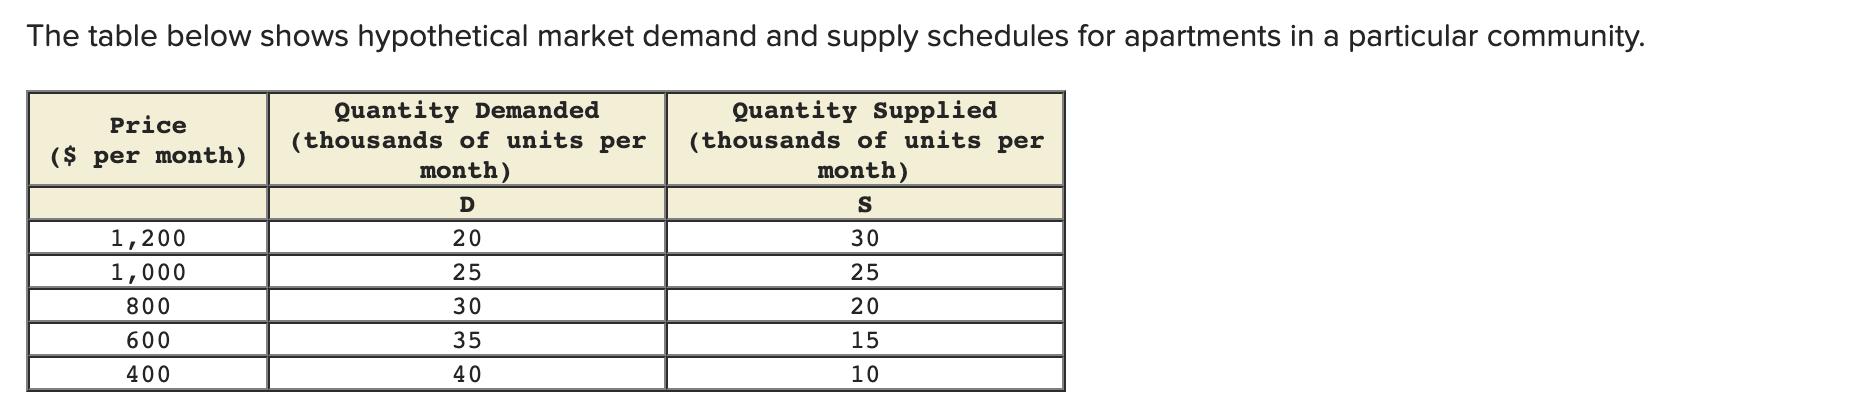 The table below shows hypothetical market demand and supply schedules for apartments in a particular